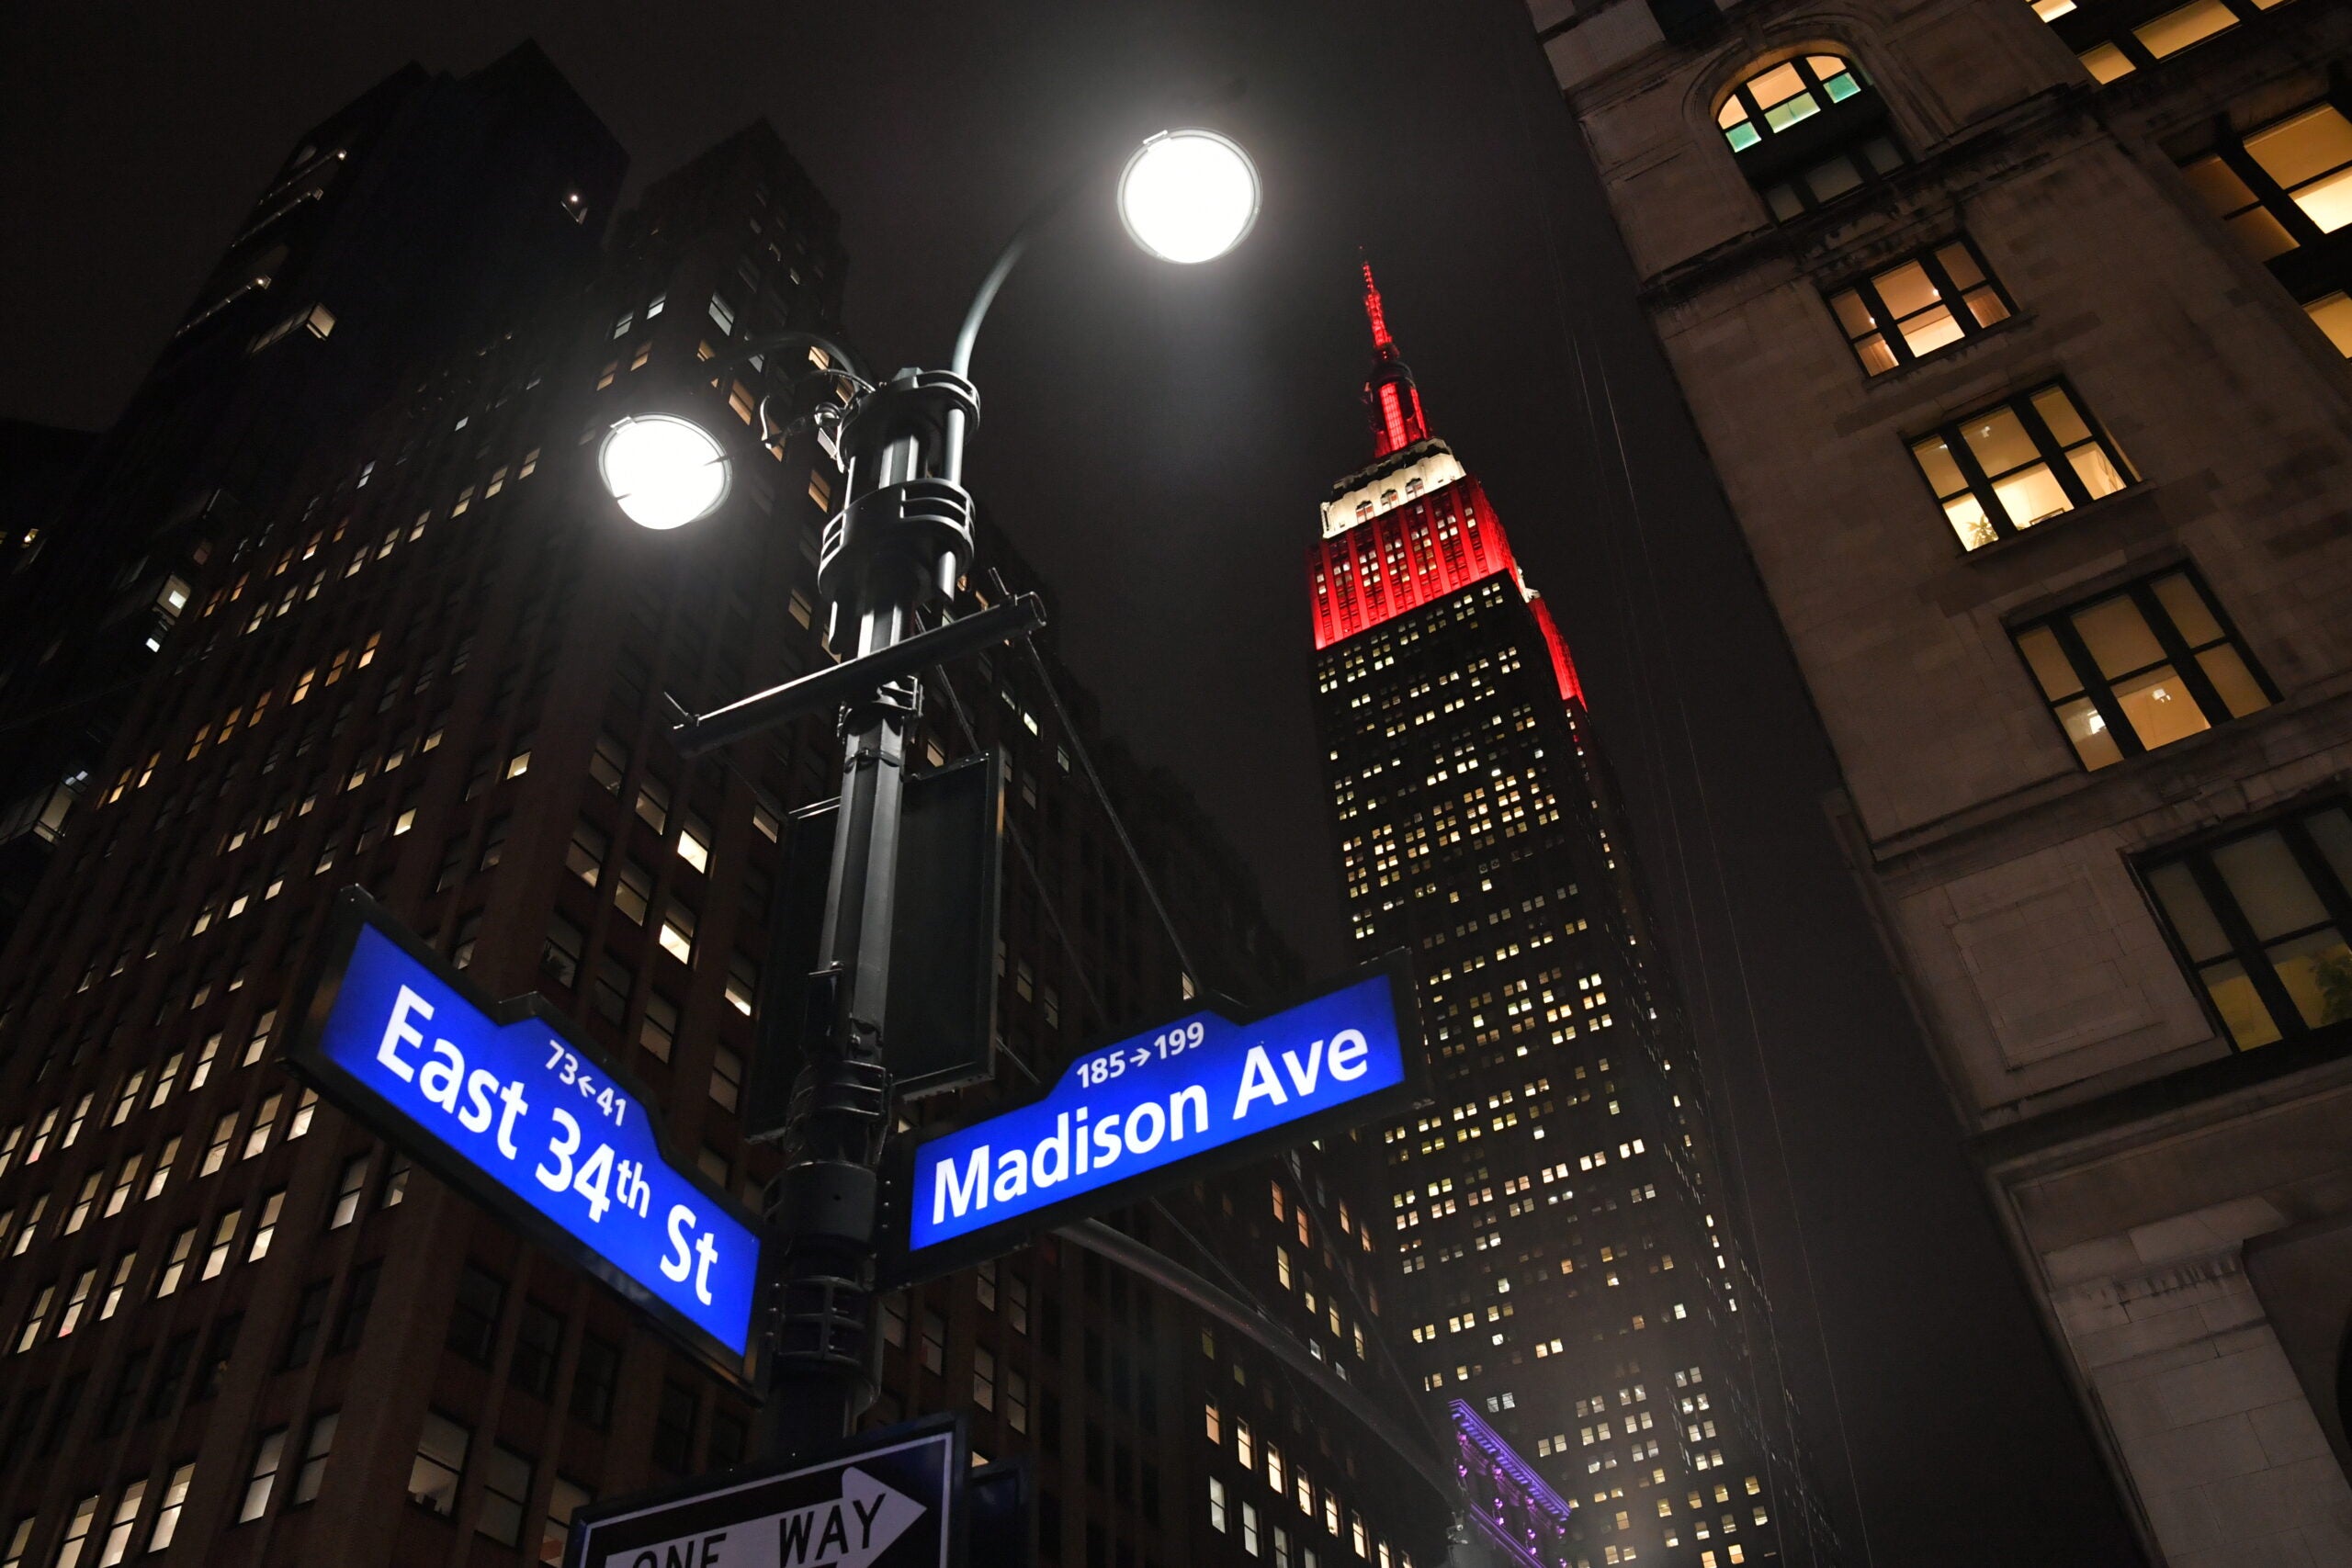 Empire State Building’s world-famous tower lights shines in red and white to honor those affected by the earthquake